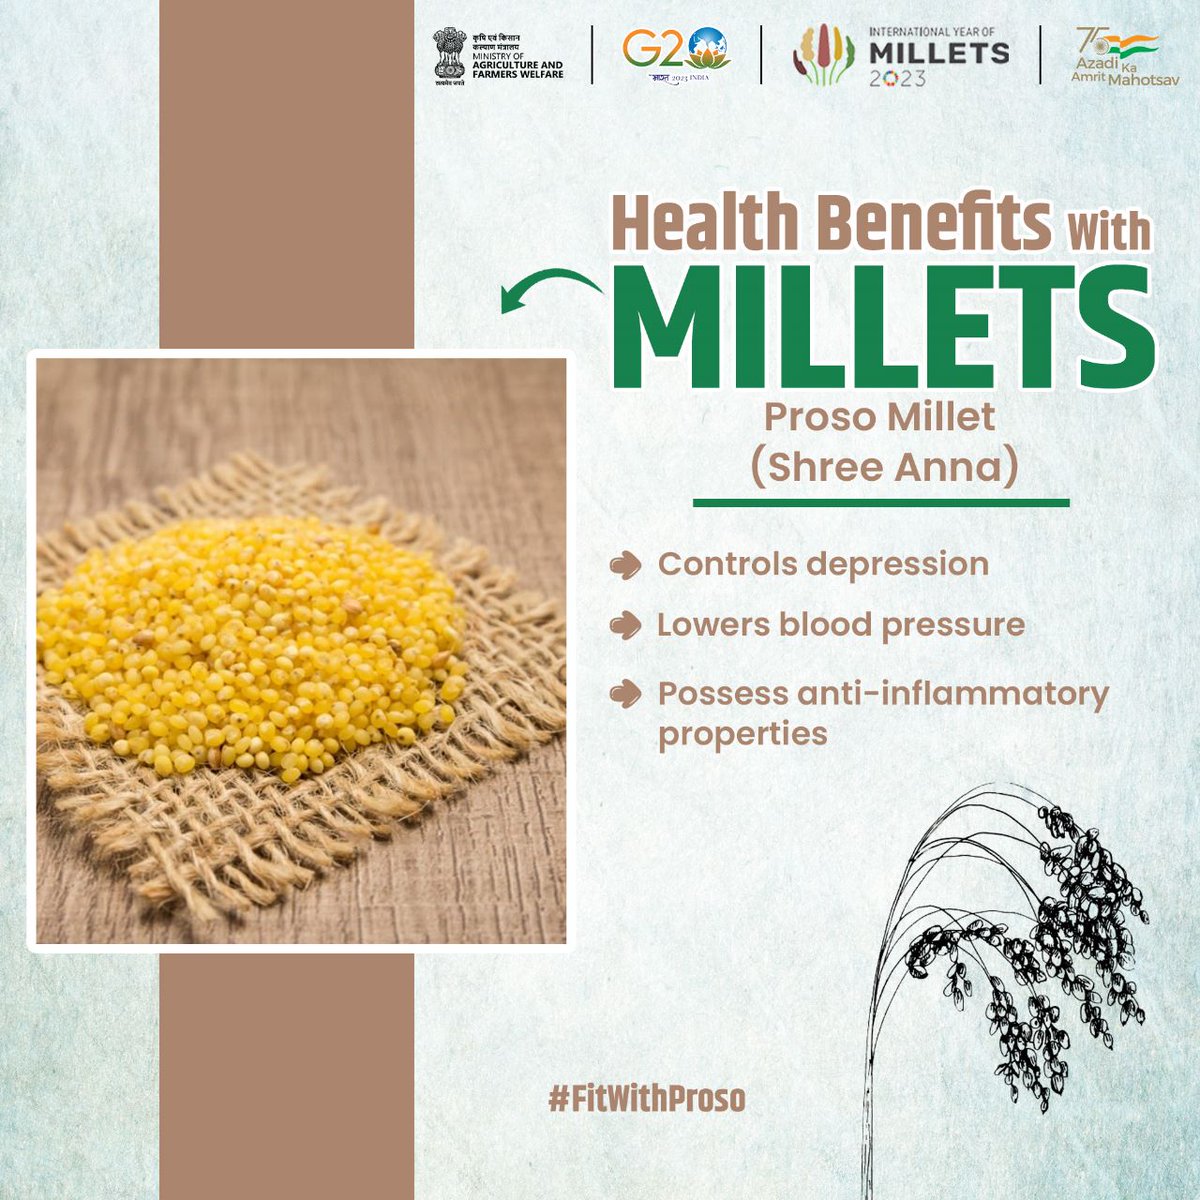 In the pink of your health with Proso!

Proso Millet helps control depression, lower blood pressure and possess anti-inflammatory properties to keep you fit and healthy.

#IYM2023 #YearofMillets #ShreeAnna 
@RajniKant_832 @NykGonda